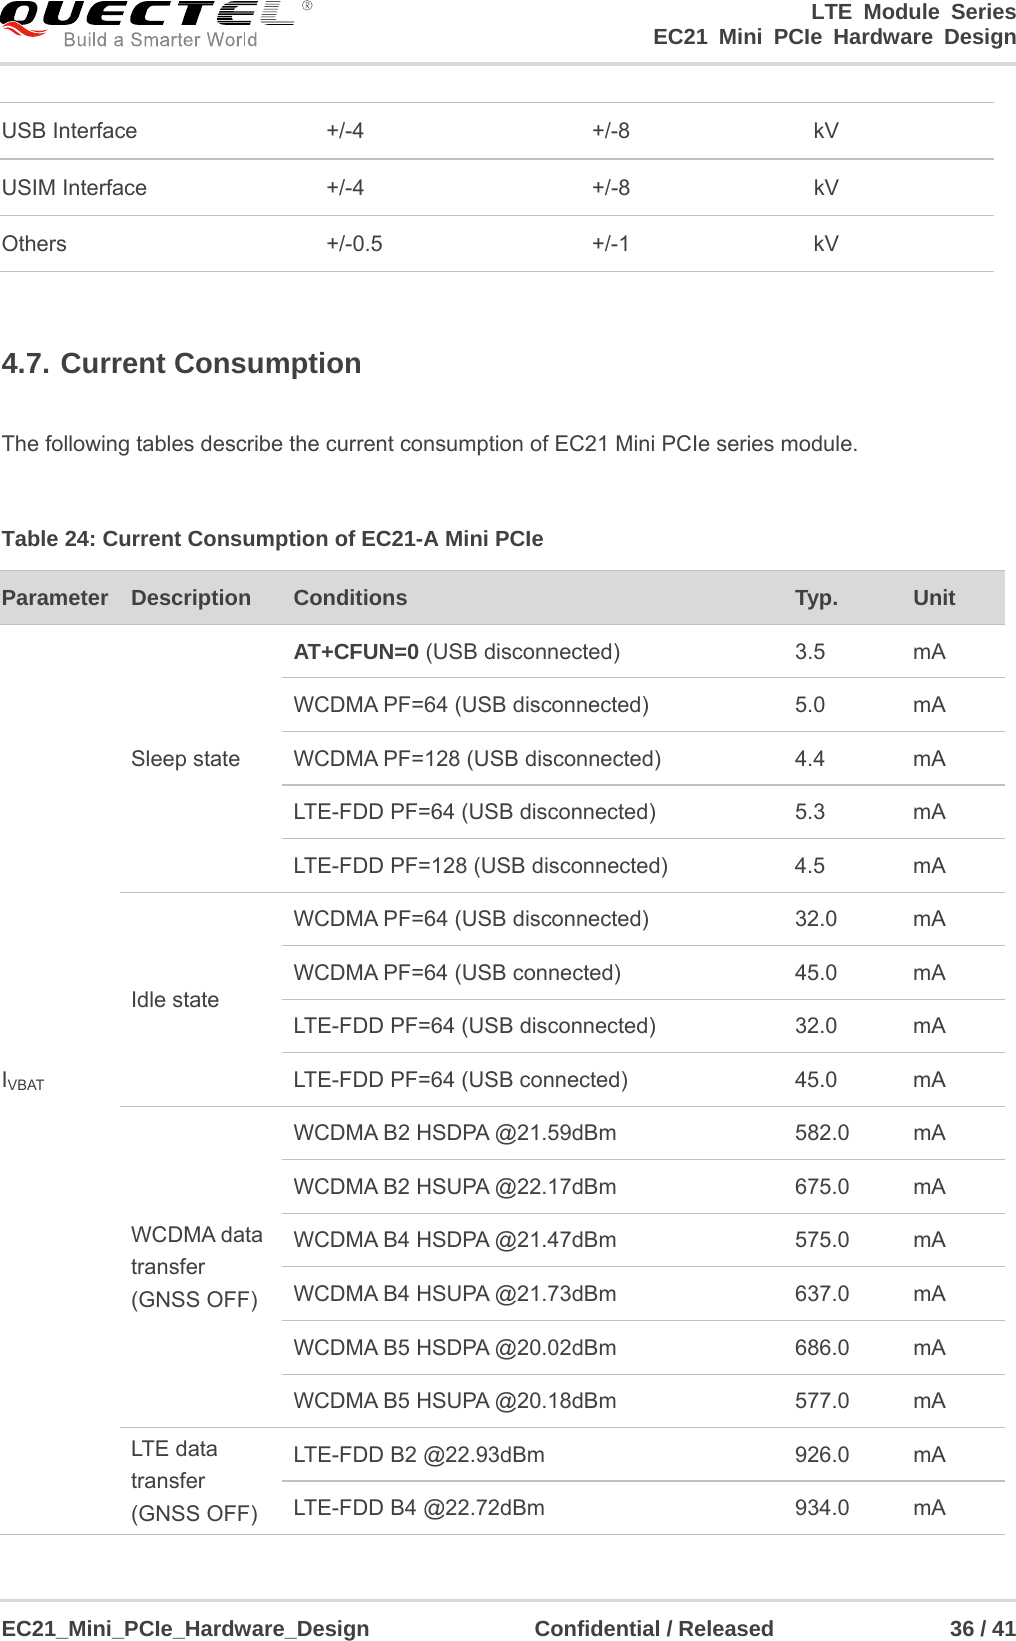                                                                        LTE Module Series                                                            EC21 Mini PCIe Hardware Design  EC21_Mini_PCIe_Hardware_Design               Confidential / Released                36 / 41     4.7. Current Consumption  The following tables describe the current consumption of EC21 Mini PCIe series module.  Table 24: Current Consumption of EC21-A Mini PCIe Parameter  Description  Conditions  Typ.  Unit IVBAT Sleep state AT+CFUN=0 (USB disconnected)  3.5 mA WCDMA PF=64 (USB disconnected)  5.0  mA WCDMA PF=128 (USB disconnected)  4.4  mA LTE-FDD PF=64 (USB disconnected)  5.3  mA LTE-FDD PF=128 (USB disconnected)  4.5  mA Idle state WCDMA PF=64 (USB disconnected)  32.0  mA WCDMA PF=64 (USB connected)  45.0  mA LTE-FDD PF=64 (USB disconnected)  32.0  mA LTE-FDD PF=64 (USB connected)  45.0  mA WCDMA data transfer (GNSS OFF) WCDMA B2 HSDPA @21.59dBm  582.0  mA WCDMA B2 HSUPA @22.17dBm  675.0  mA WCDMA B4 HSDPA @21.47dBm  575.0  mA WCDMA B4 HSUPA @21.73dBm  637.0  mA WCDMA B5 HSDPA @20.02dBm  686.0  mA WCDMA B5 HSUPA @20.18dBm  577.0  mA LTE data transfer (GNSS OFF) LTE-FDD B2 @22.93dBm  926.0  mA LTE-FDD B4 @22.72dBm  934.0  mA USB Interface  +/-4  +/-8  kV USIM Interface  +/-4  +/-8  kV Others +/-0.5 +/-1 kV 